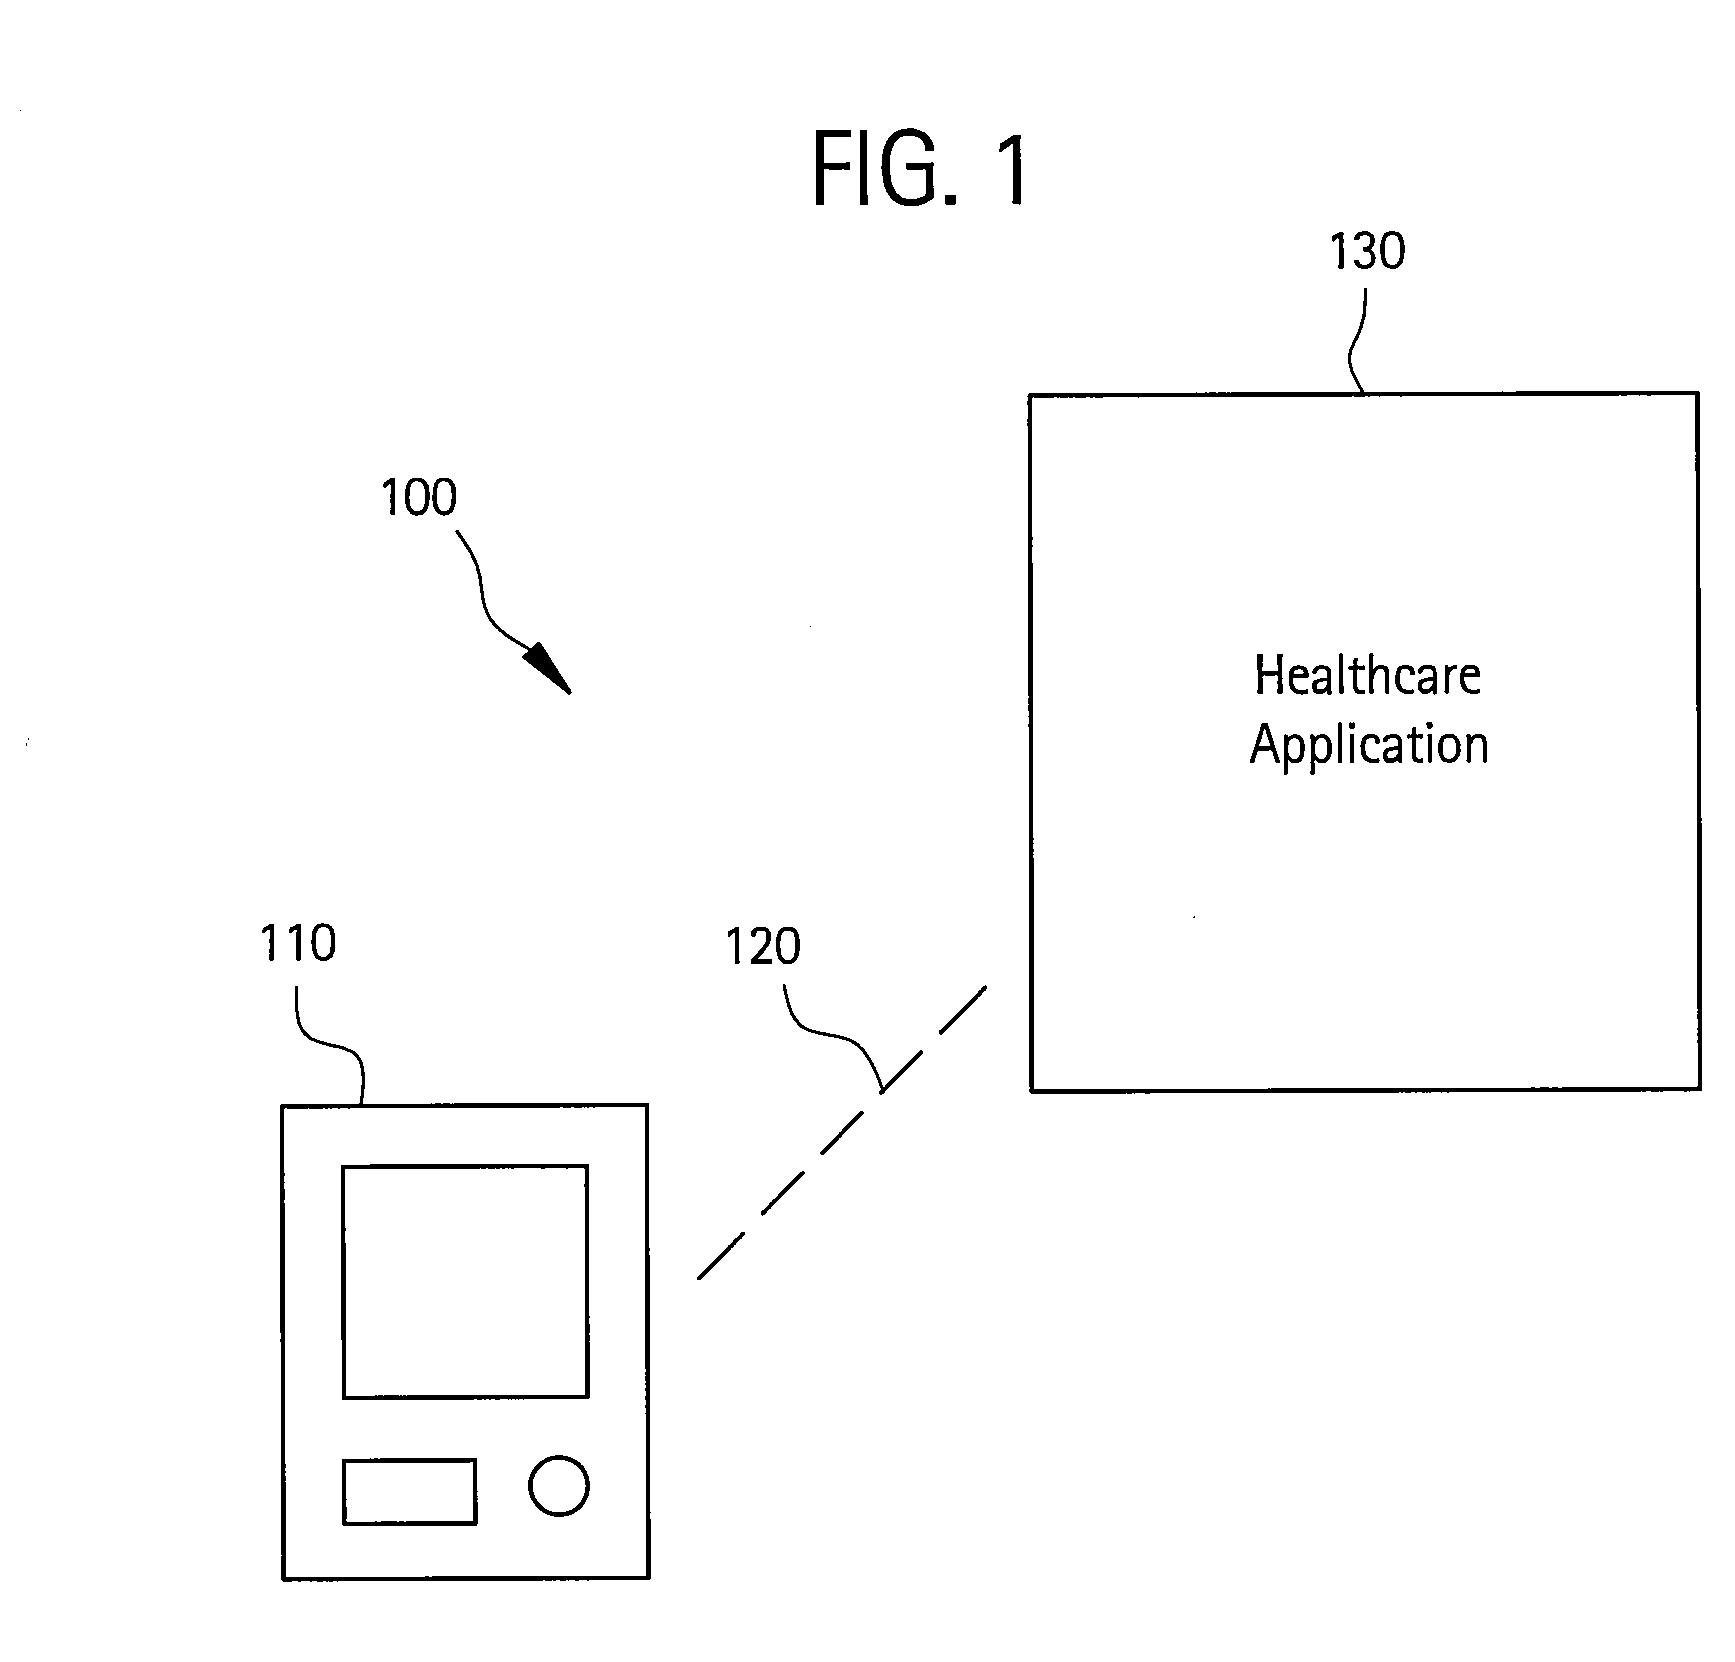 Methods and systems for healthcare application interaction using gesture-based interaction enhanced with pressure sensitivity